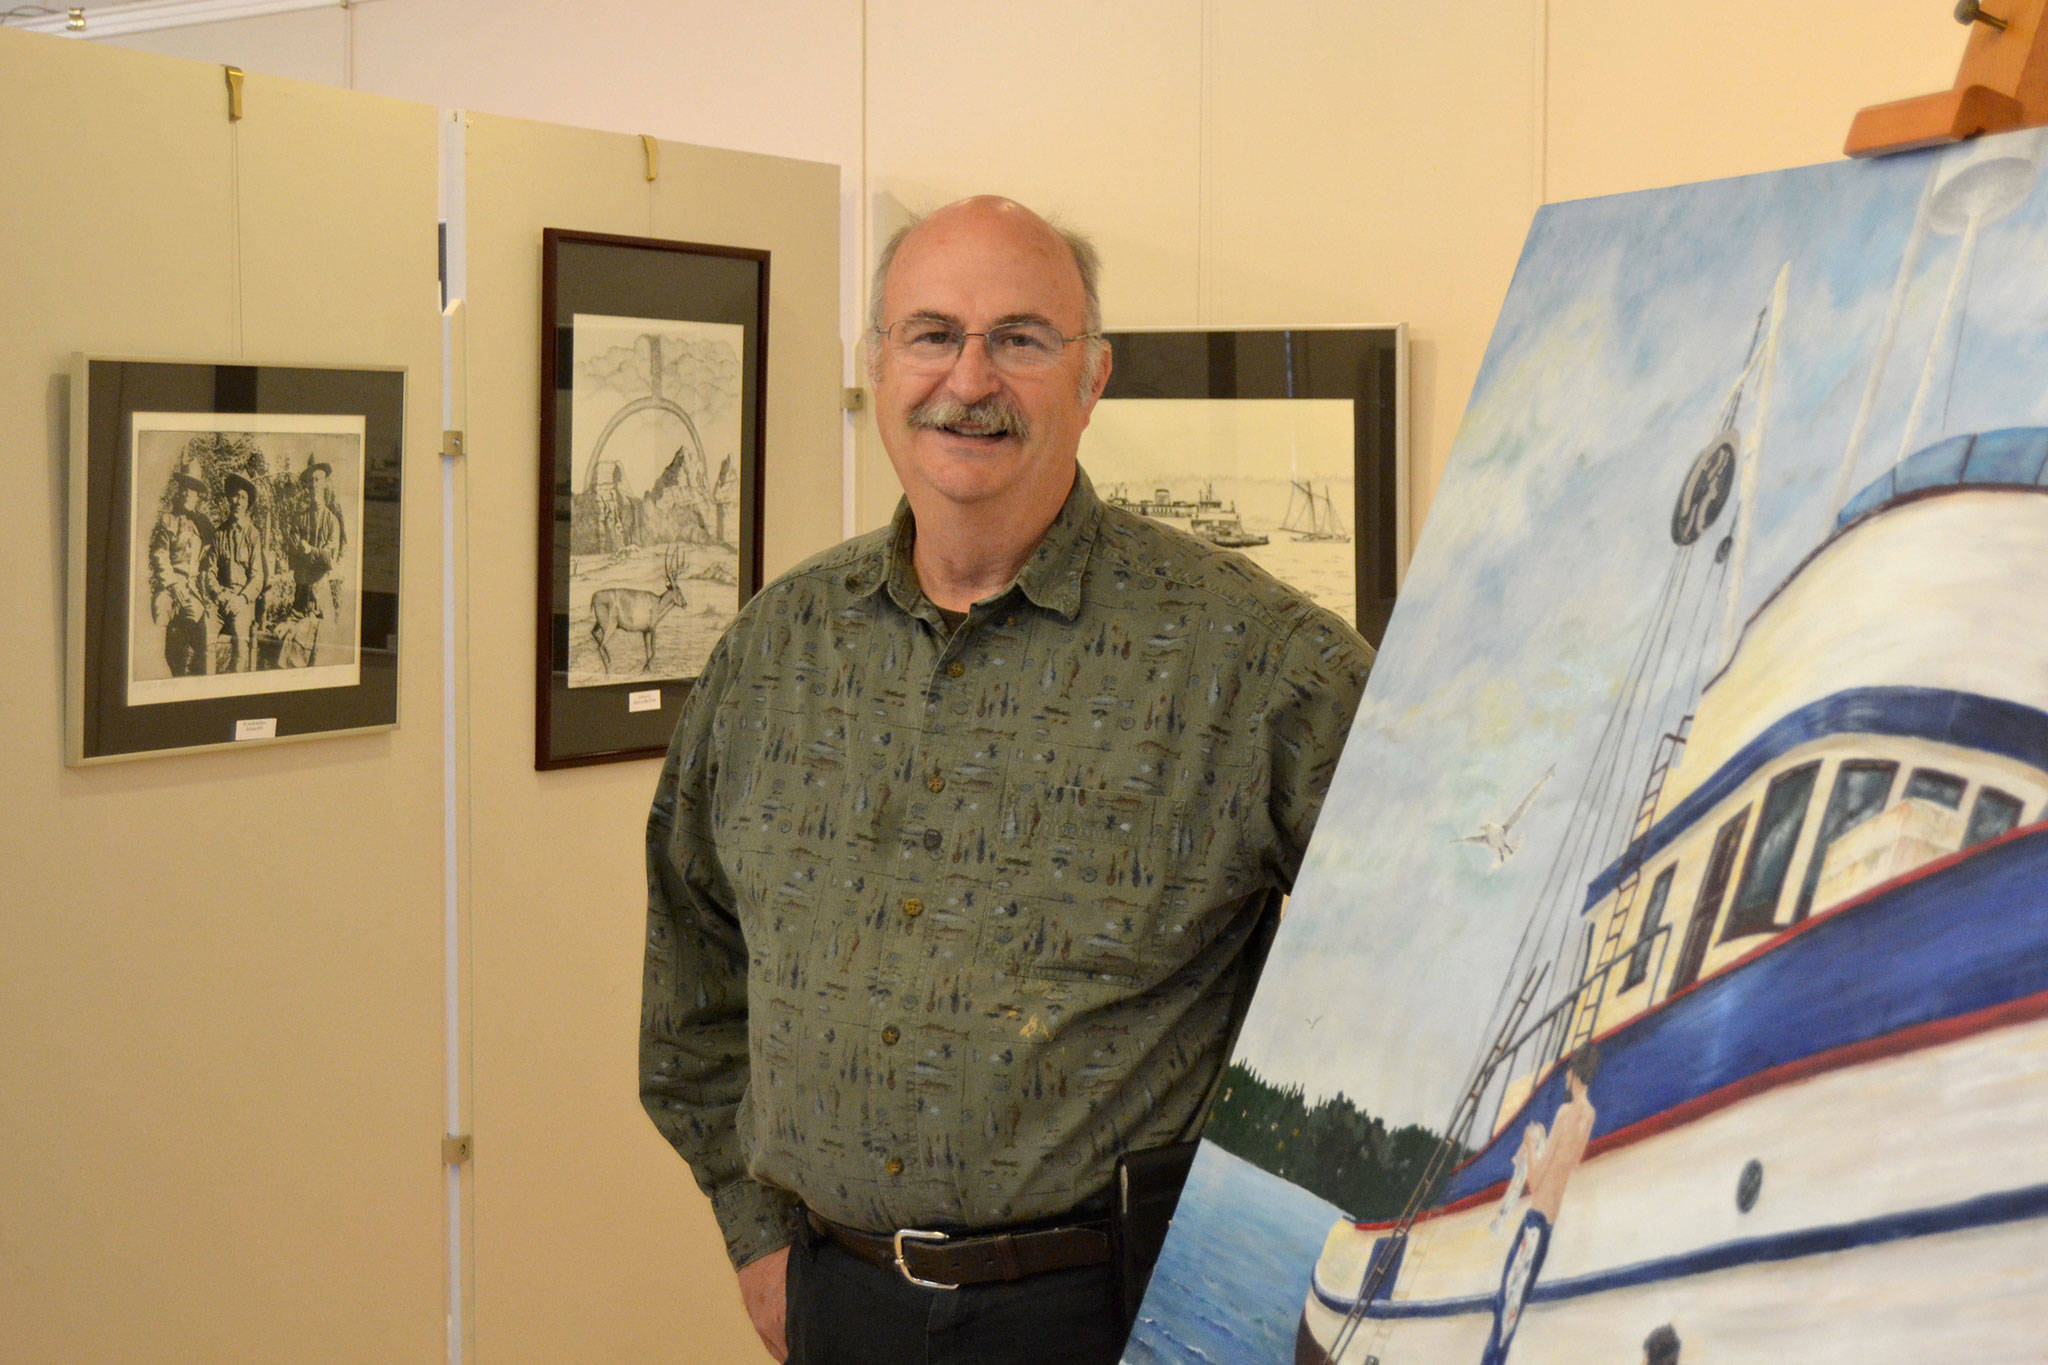 After retiring in 2015 as fire chief for Clallam County Fire District 3, Steve Vogel turned his attention to art, volunteering and writing. His first art show is on display through April 28 at the Sequim Museum and Arts Exhibit Center. Sequim Gazette photo by Matthew Nash